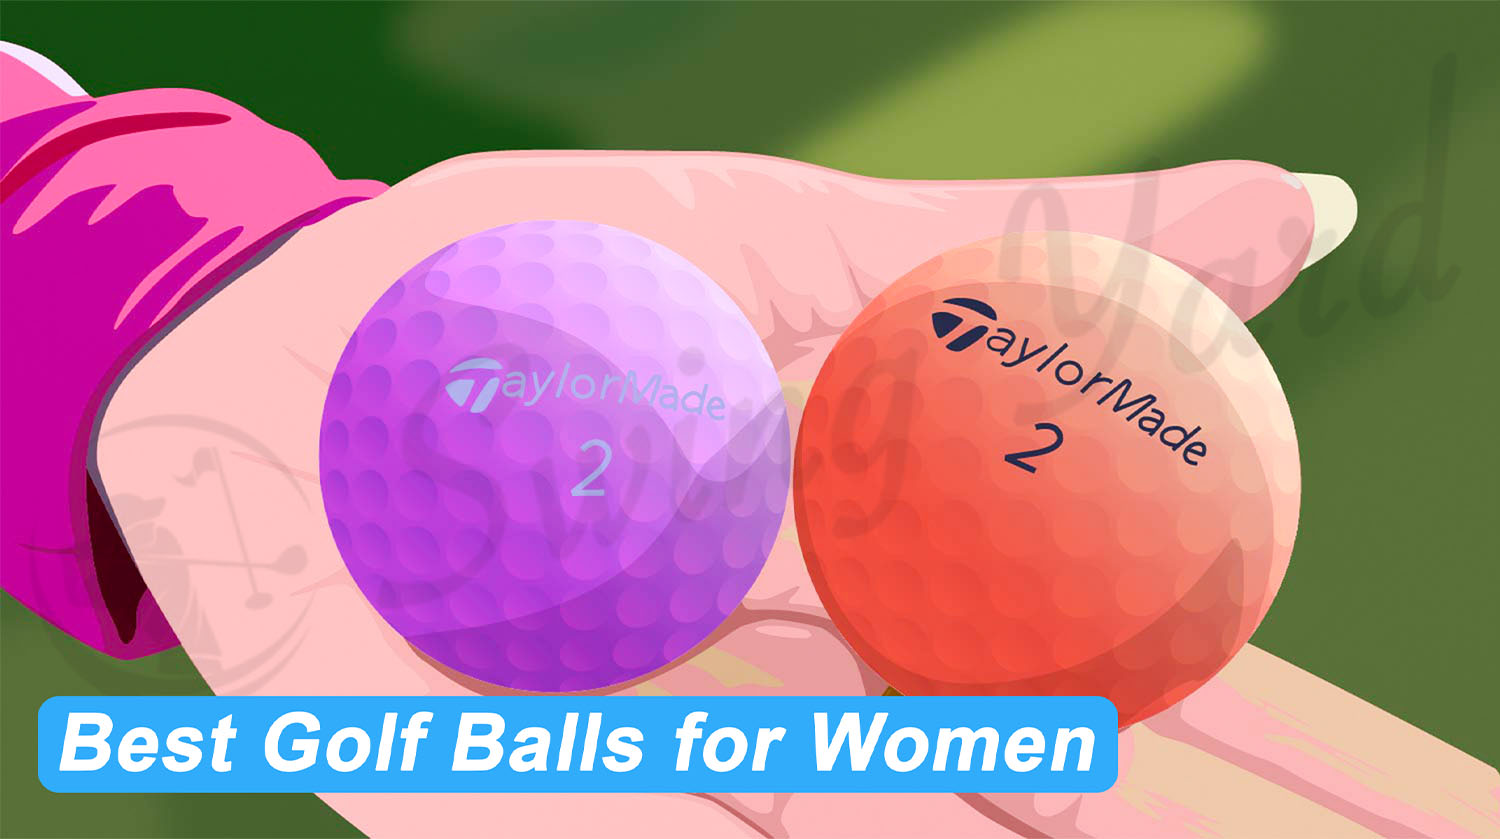 Holding two of the best golf balls for women